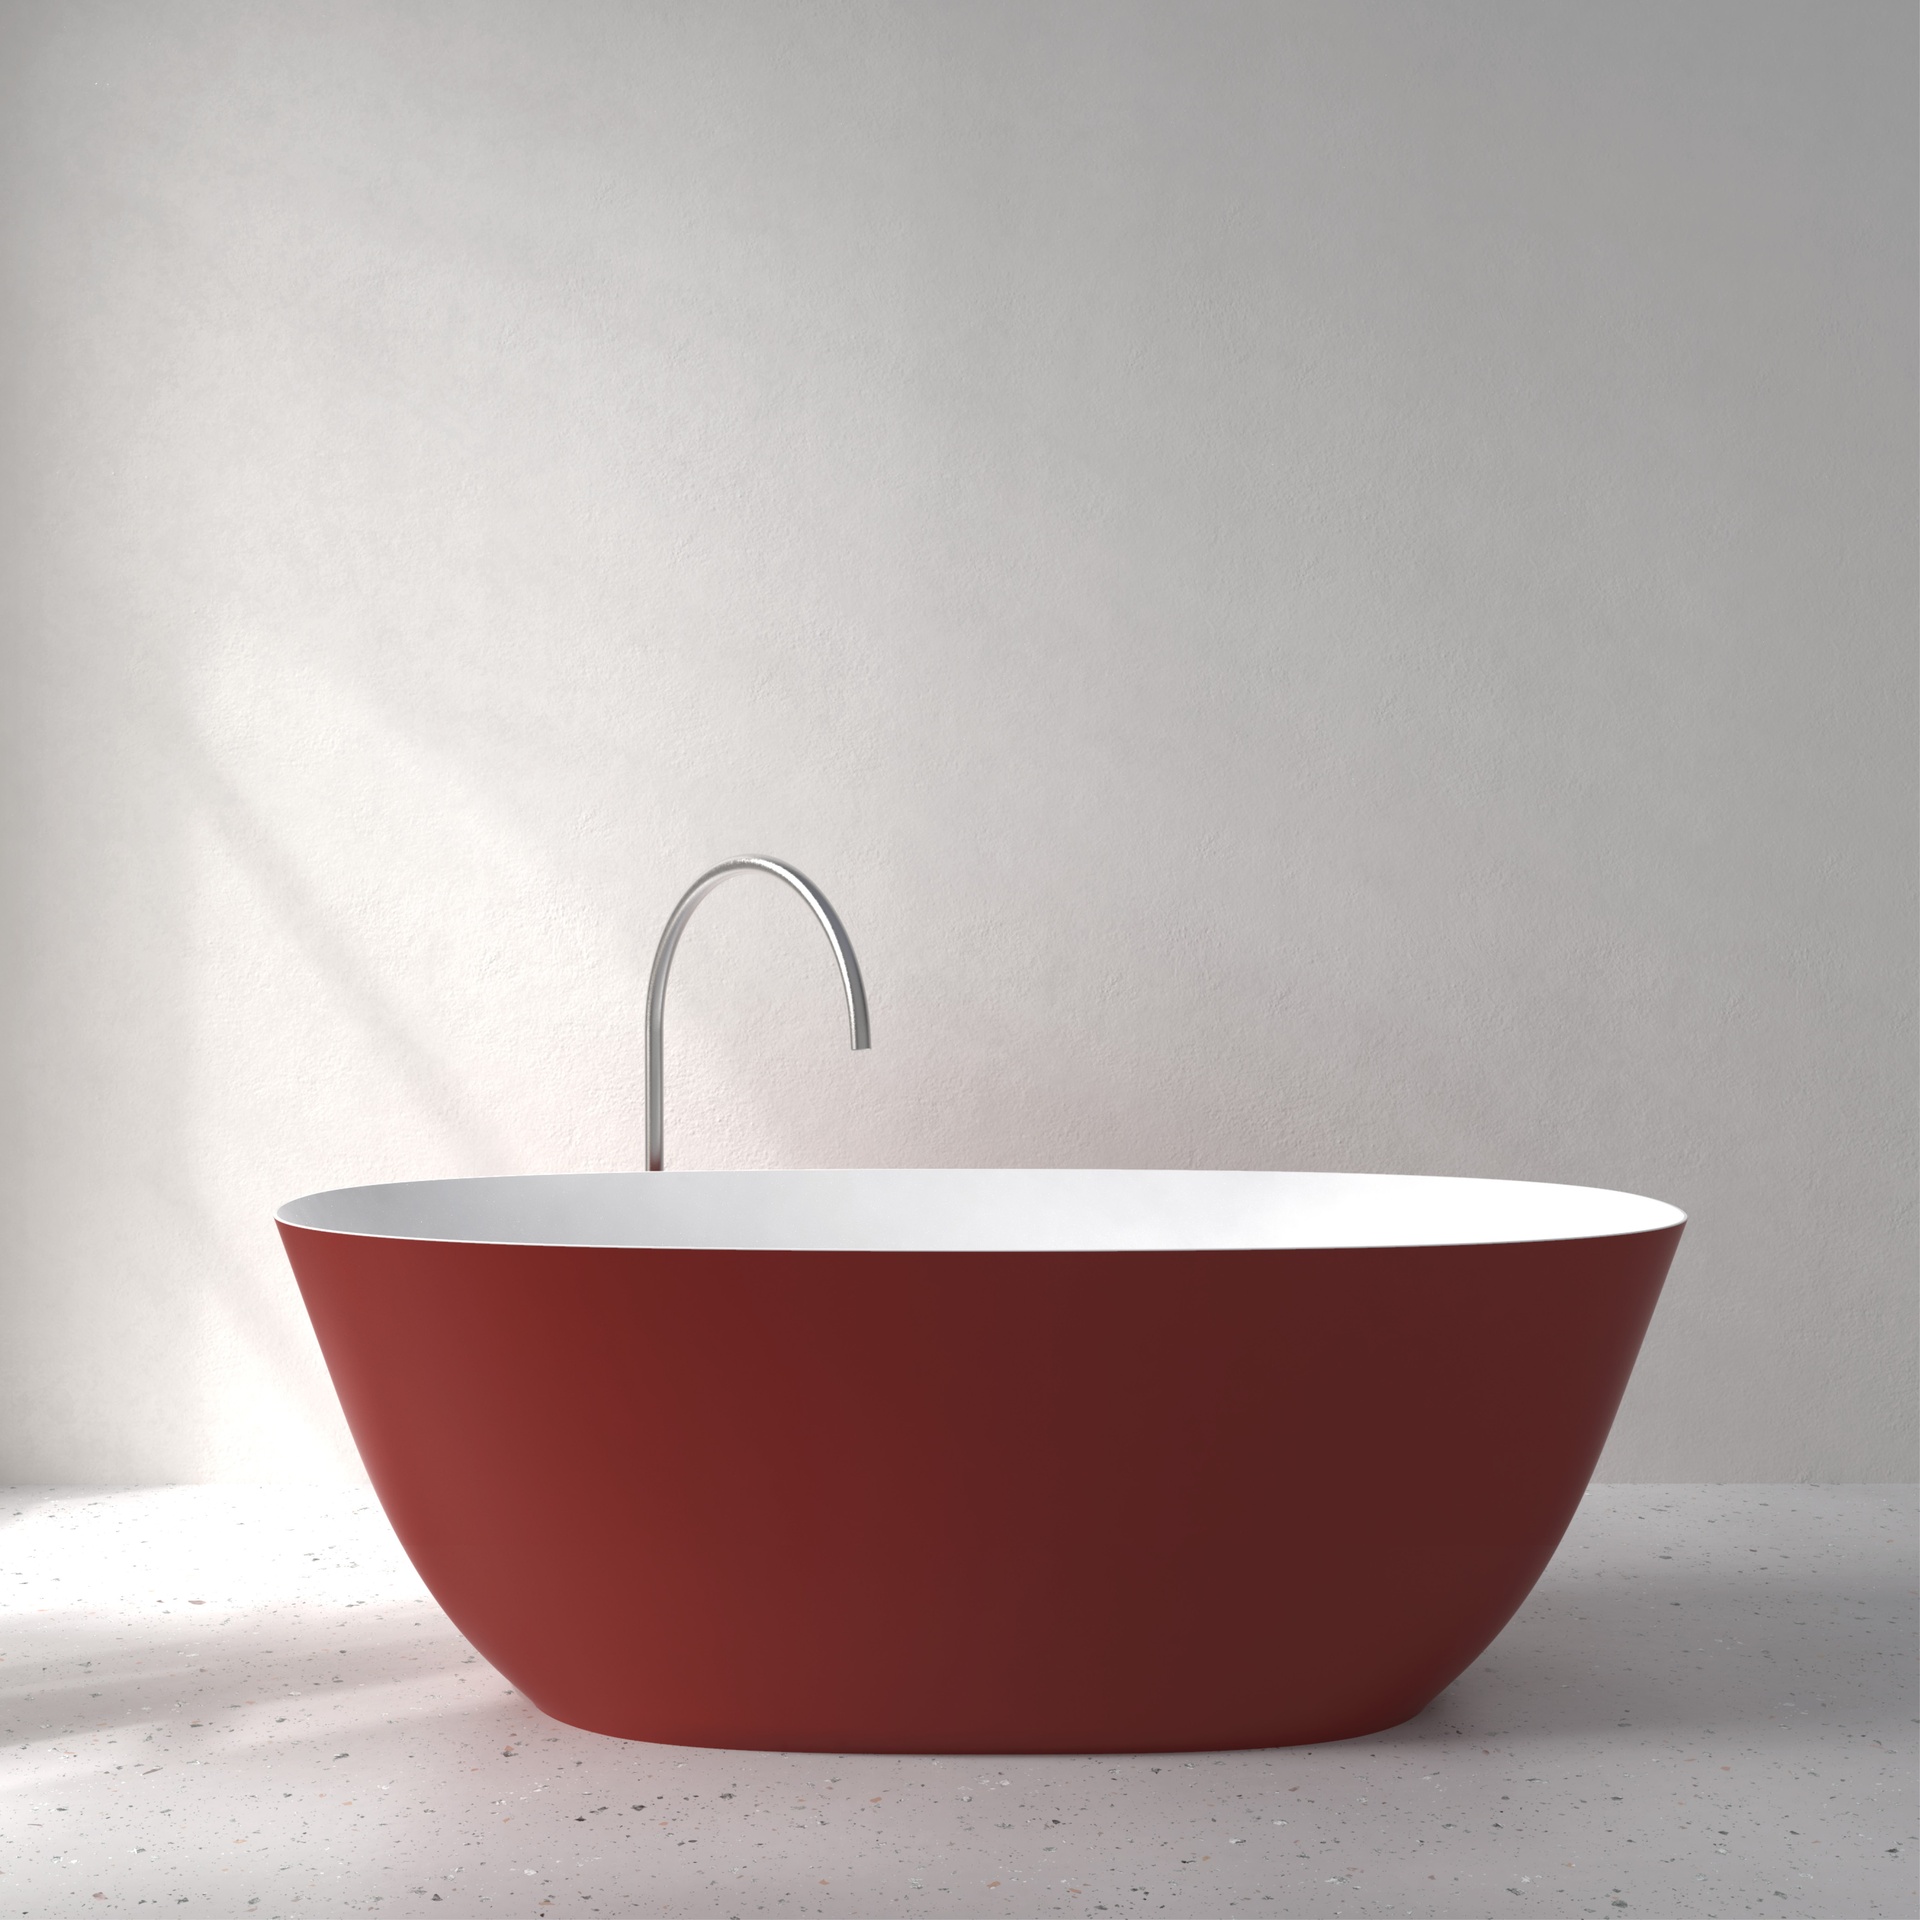 [FFI03-SRAL] Fine bath with Soft Touch (w1700 x d750 x h580mm, RAL color)